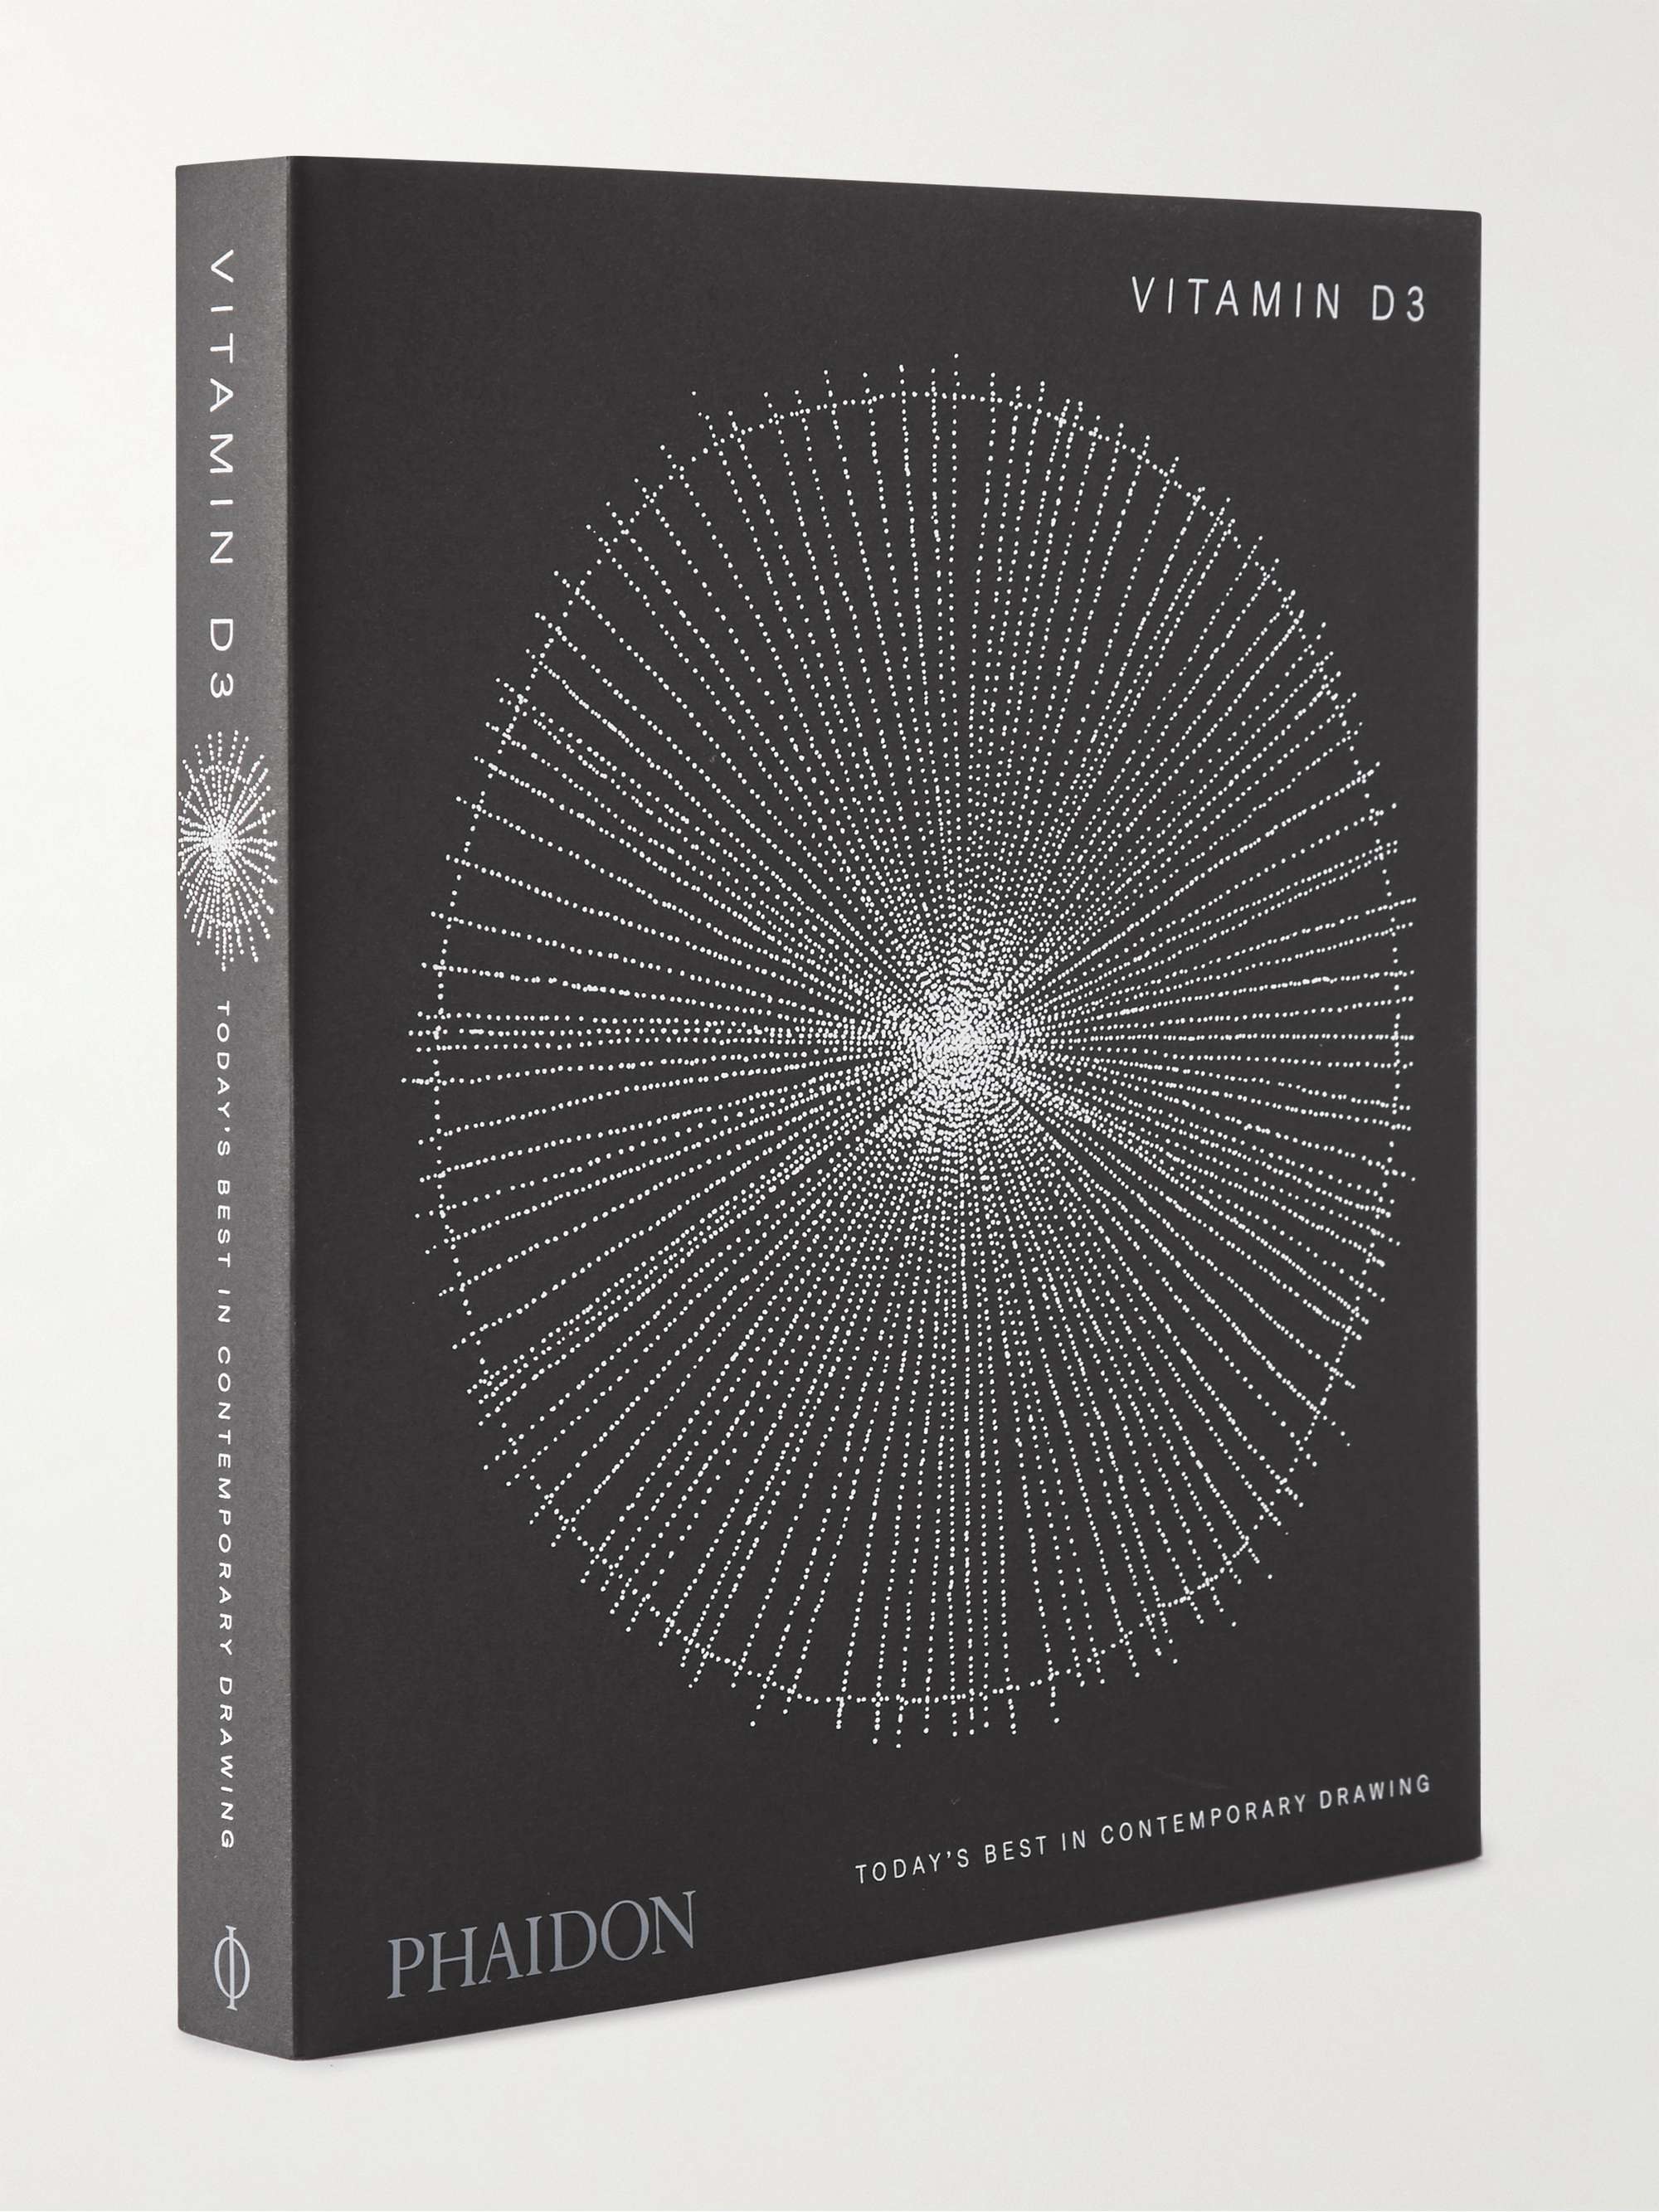 PHAIDON Vitamin D3: Today's Best in Contemporary Drawing Hardcover Book